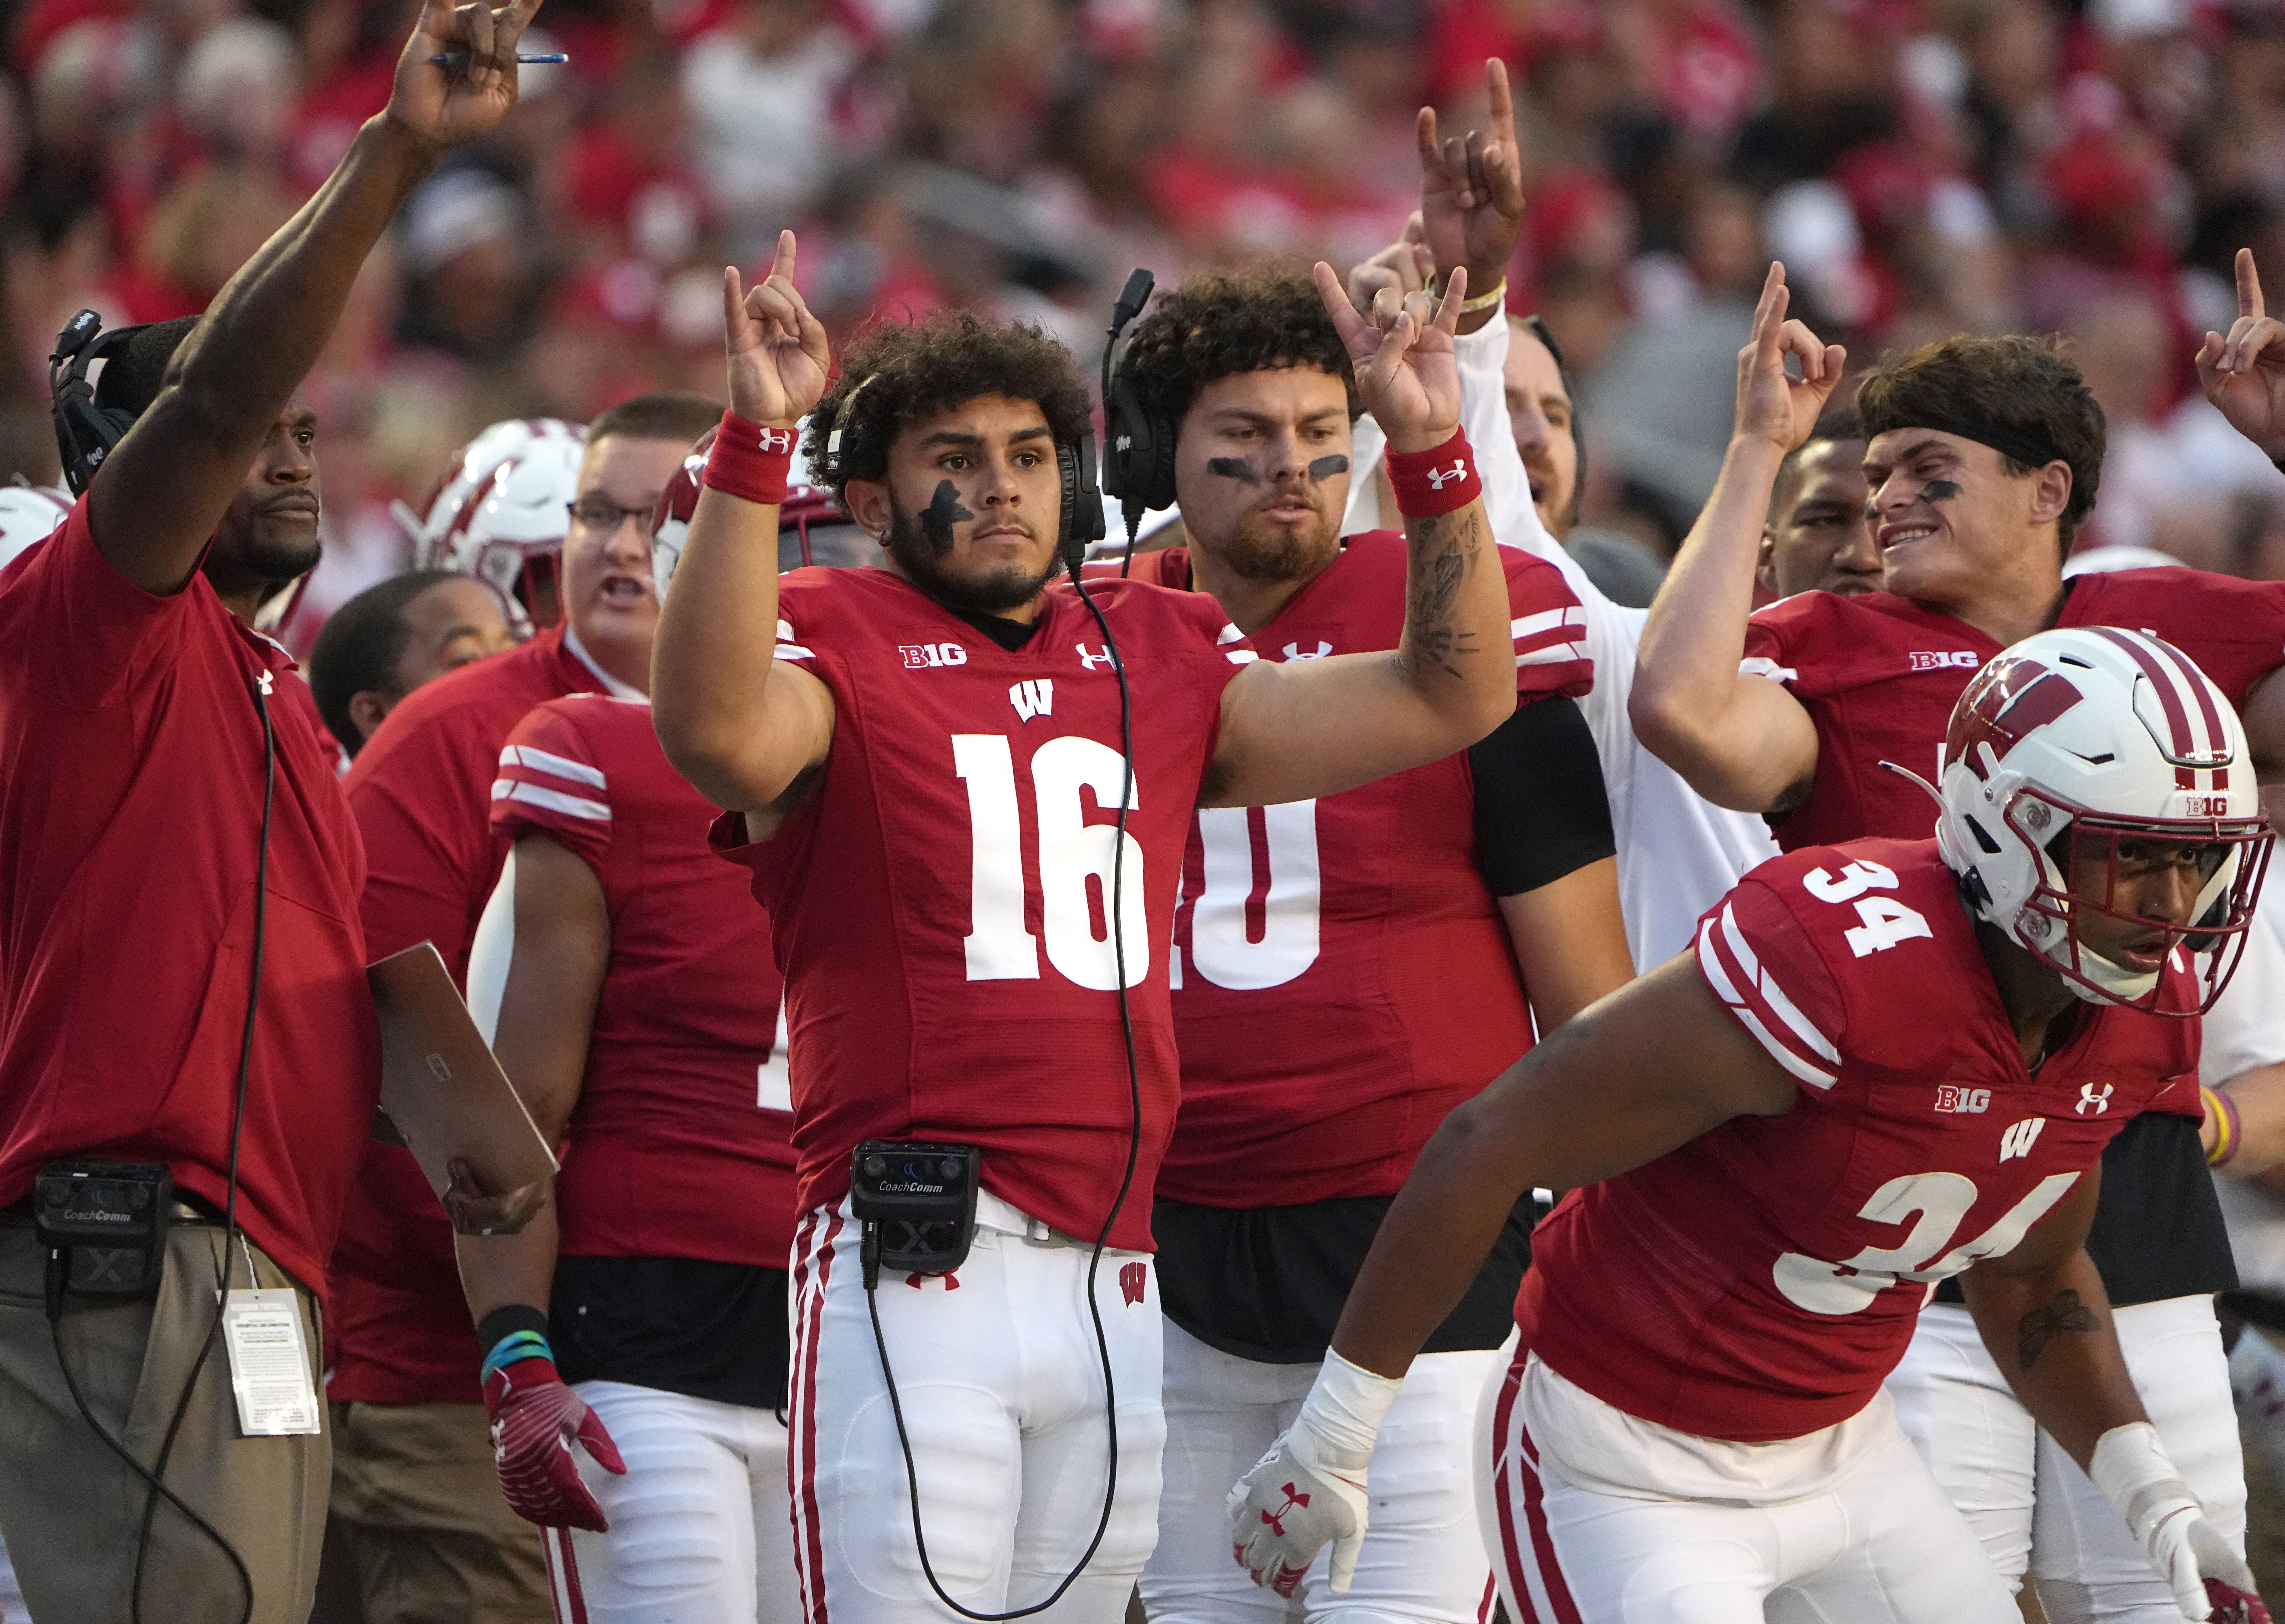 Watch: Badger quarterback explains reason for staying